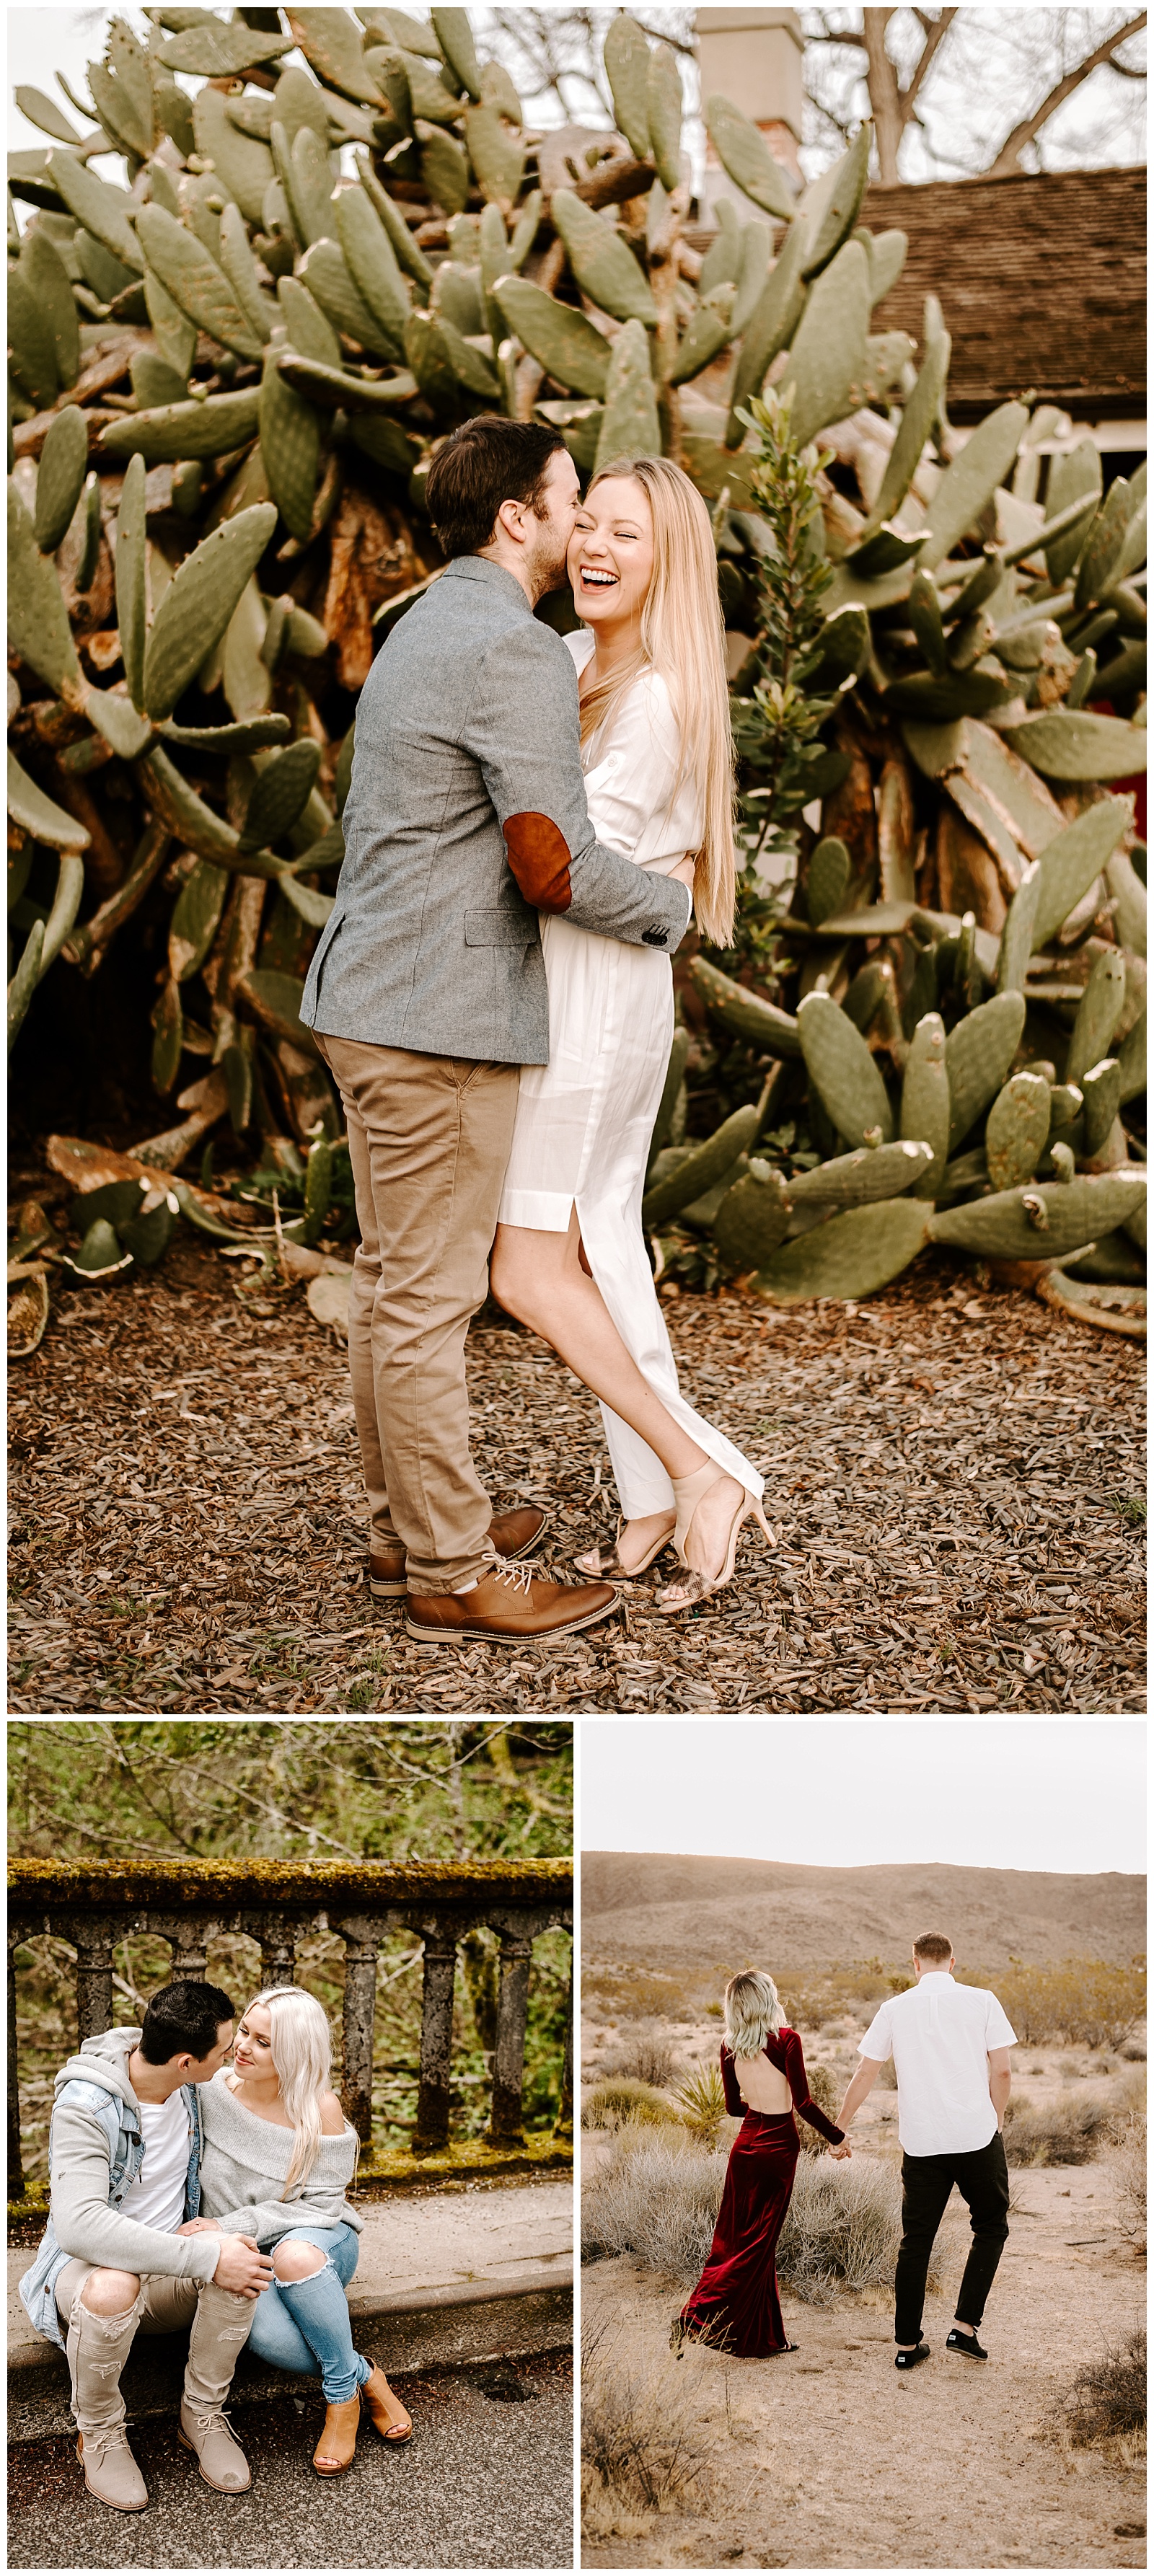 What to wear for engagement pictures